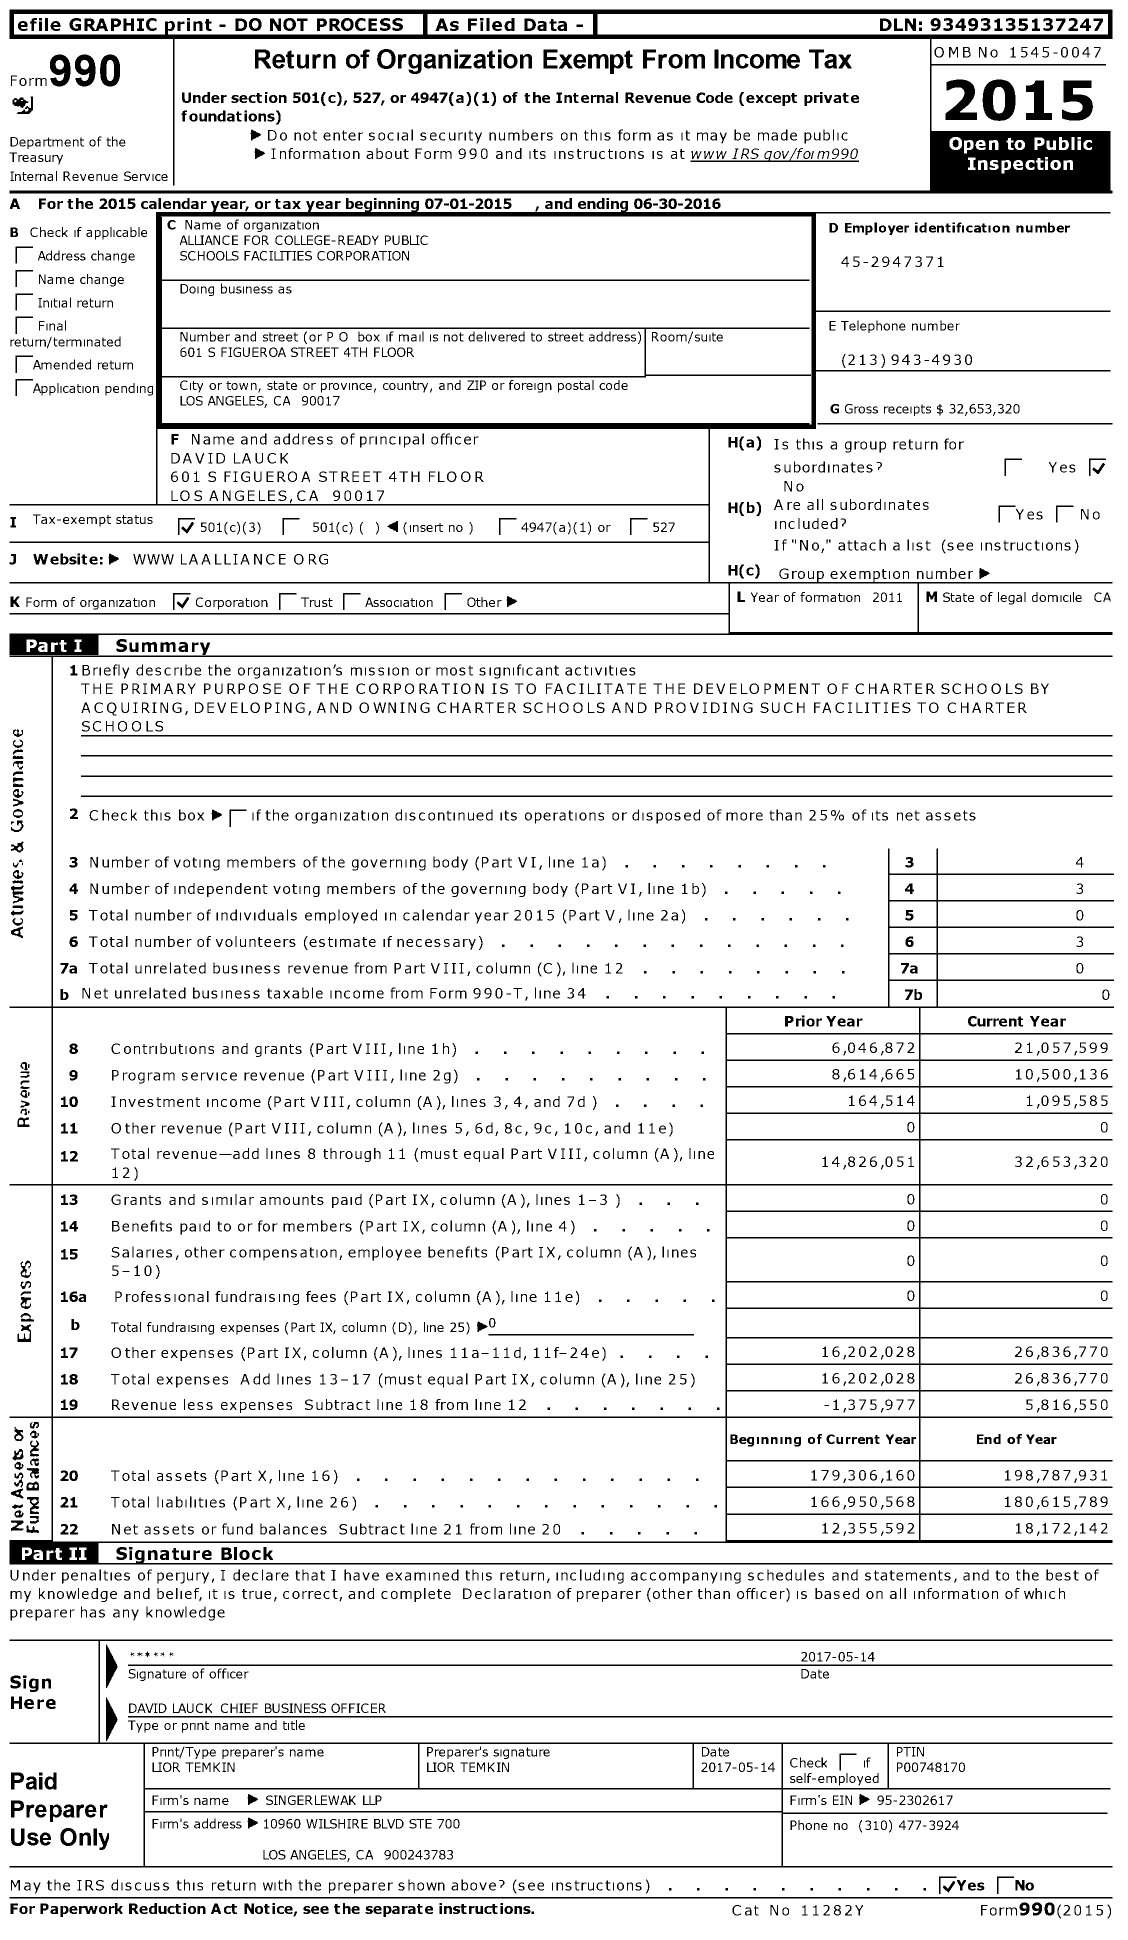 Image of first page of 2015 Form 990 for Alliance for College-Ready Public Schools Facilities Corporation